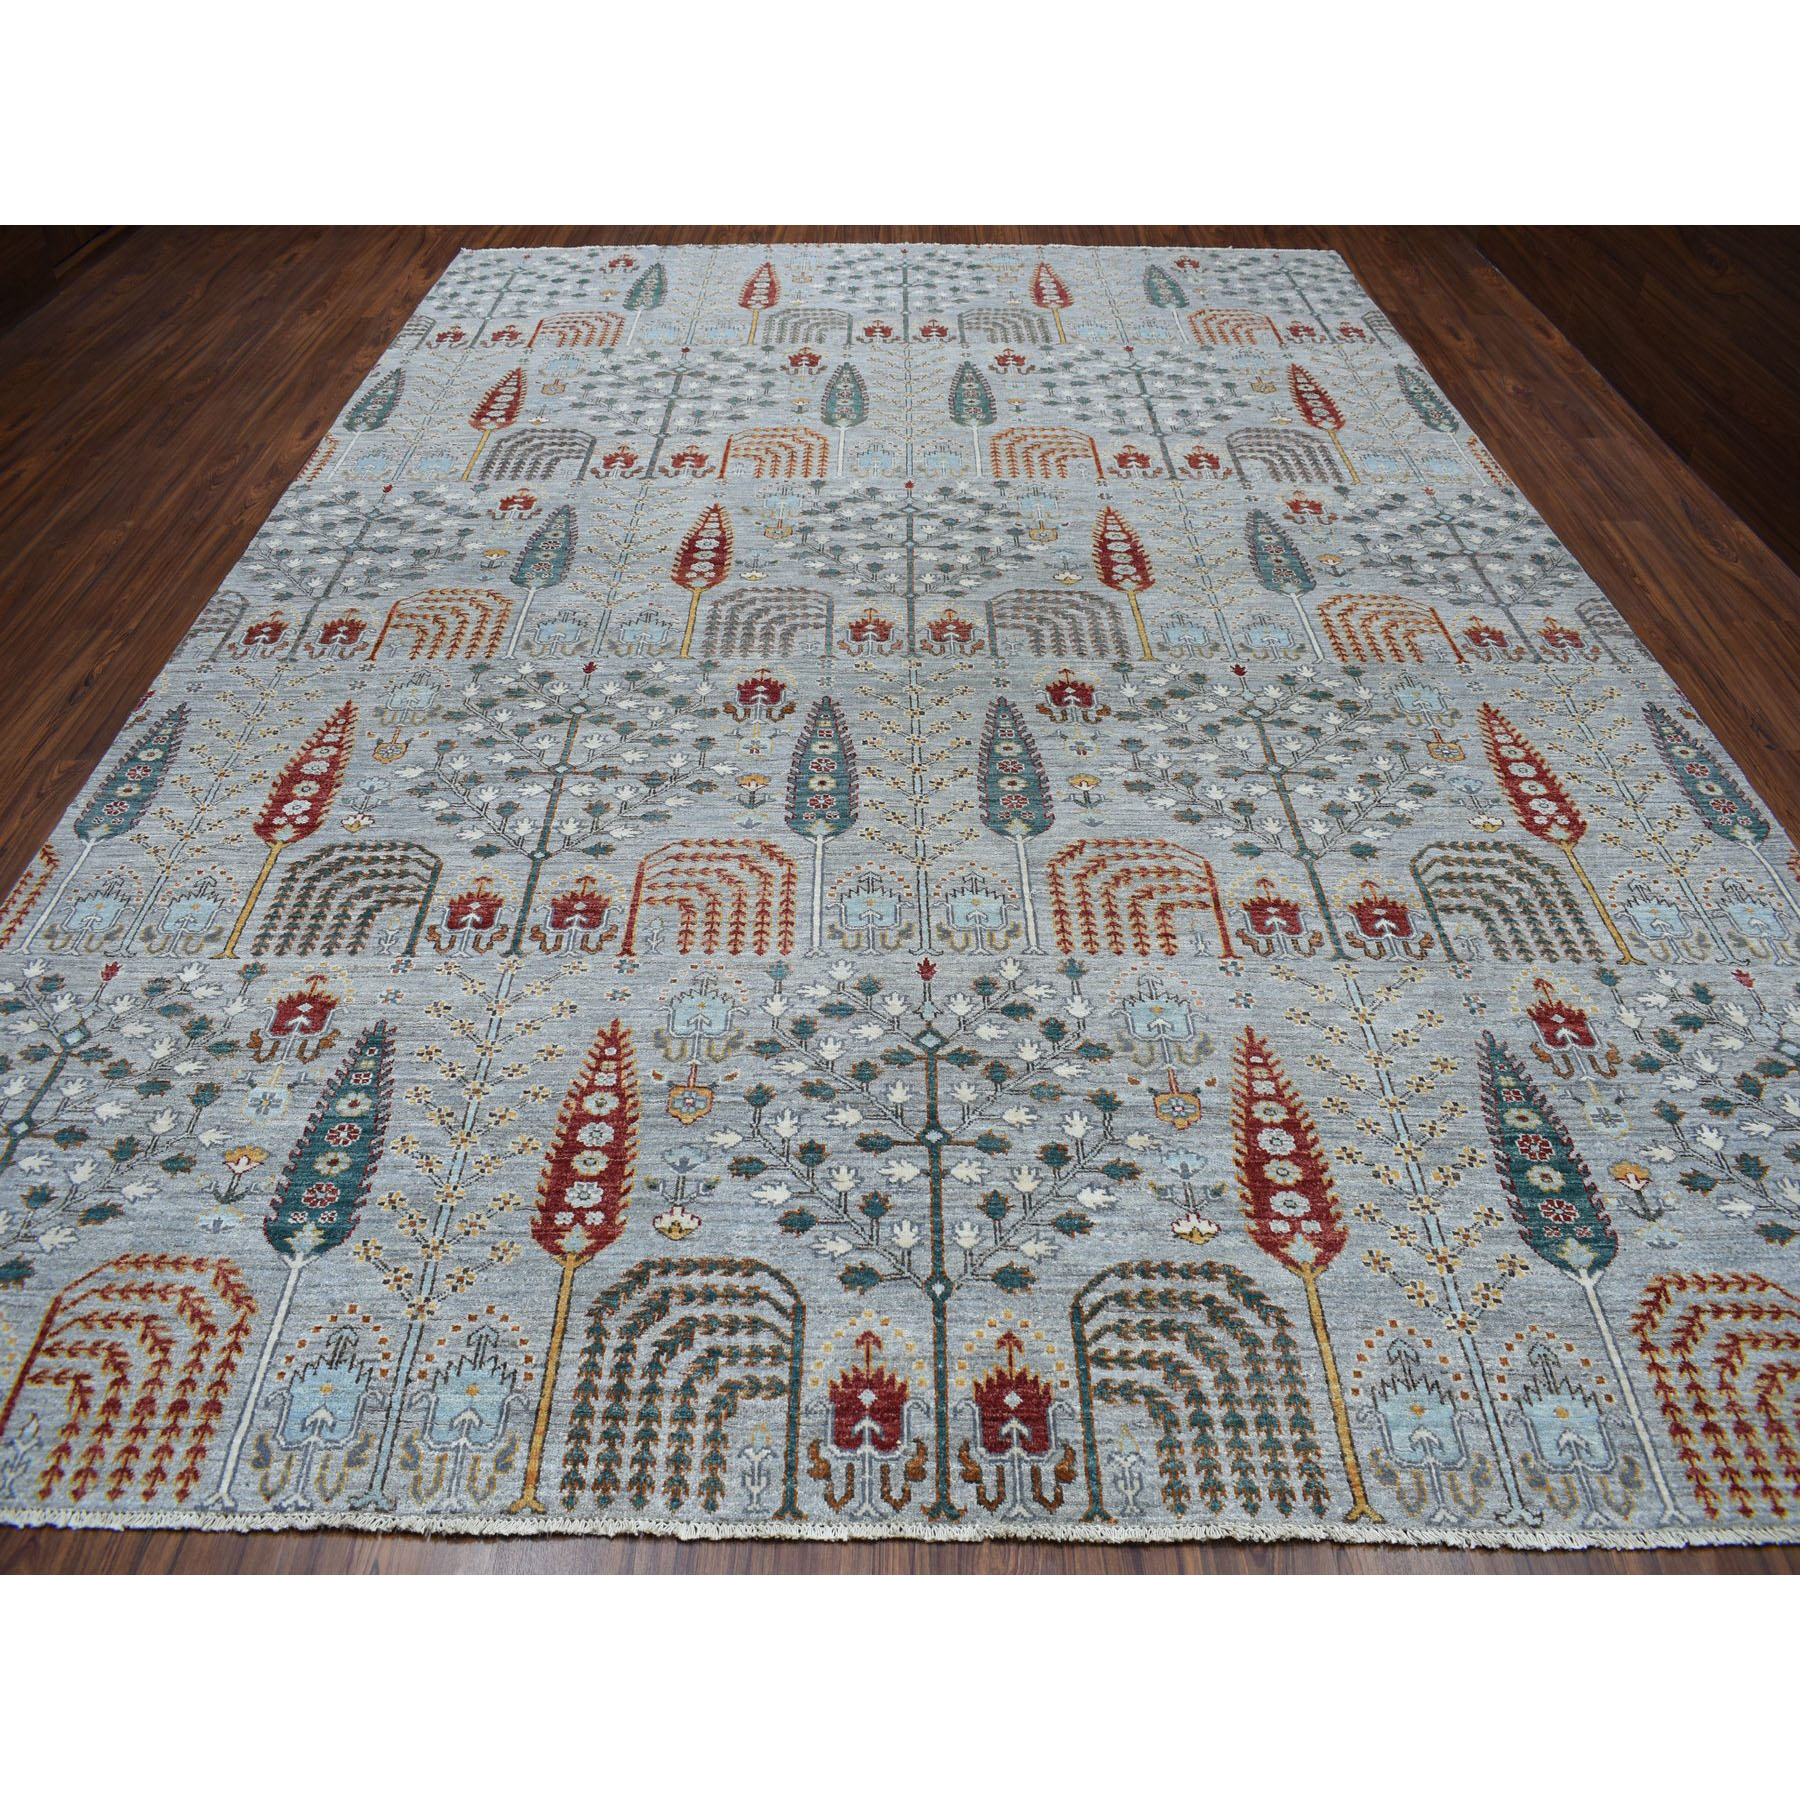 10-2 x14- Gray Peshawar Willow And Cypress Tree Design Hand-Knotted Oriental Rug 